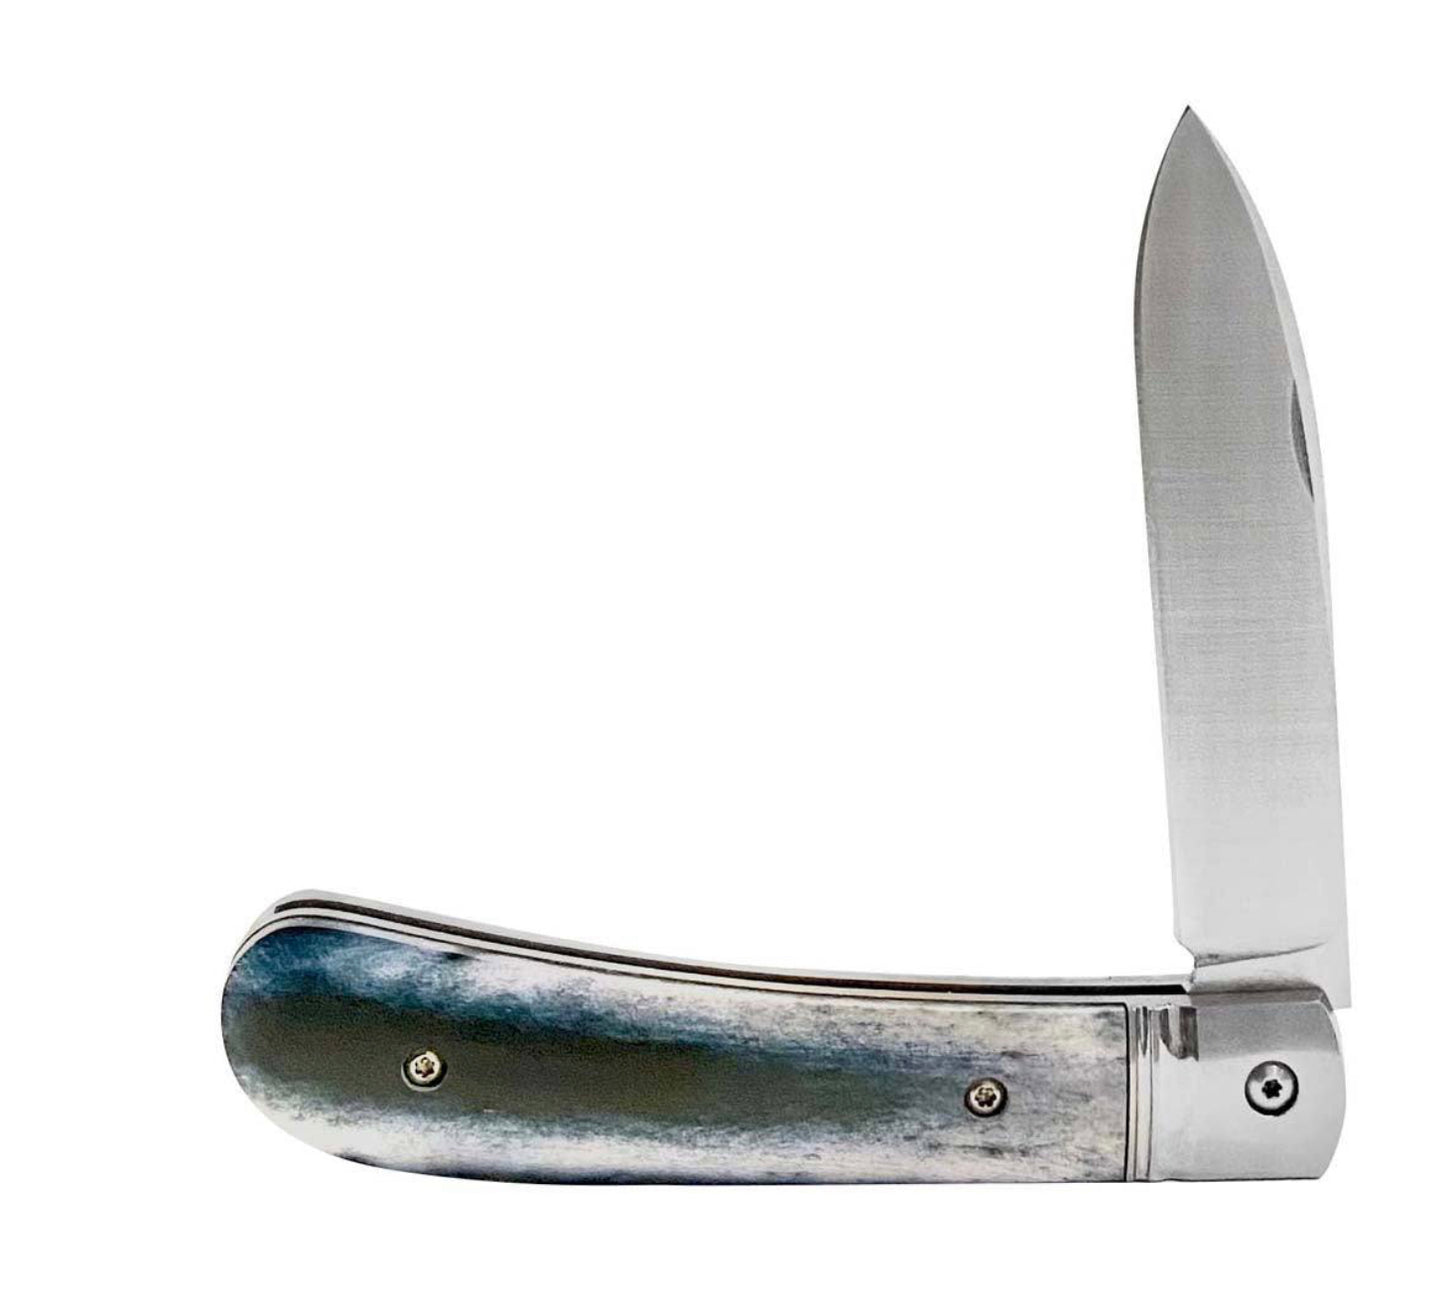 HOOEY KNIFE, DYED CAMEL BONE ZULU SLIP JOINT 3” BLADE LENGTH WITH A 3.75” HANDLE